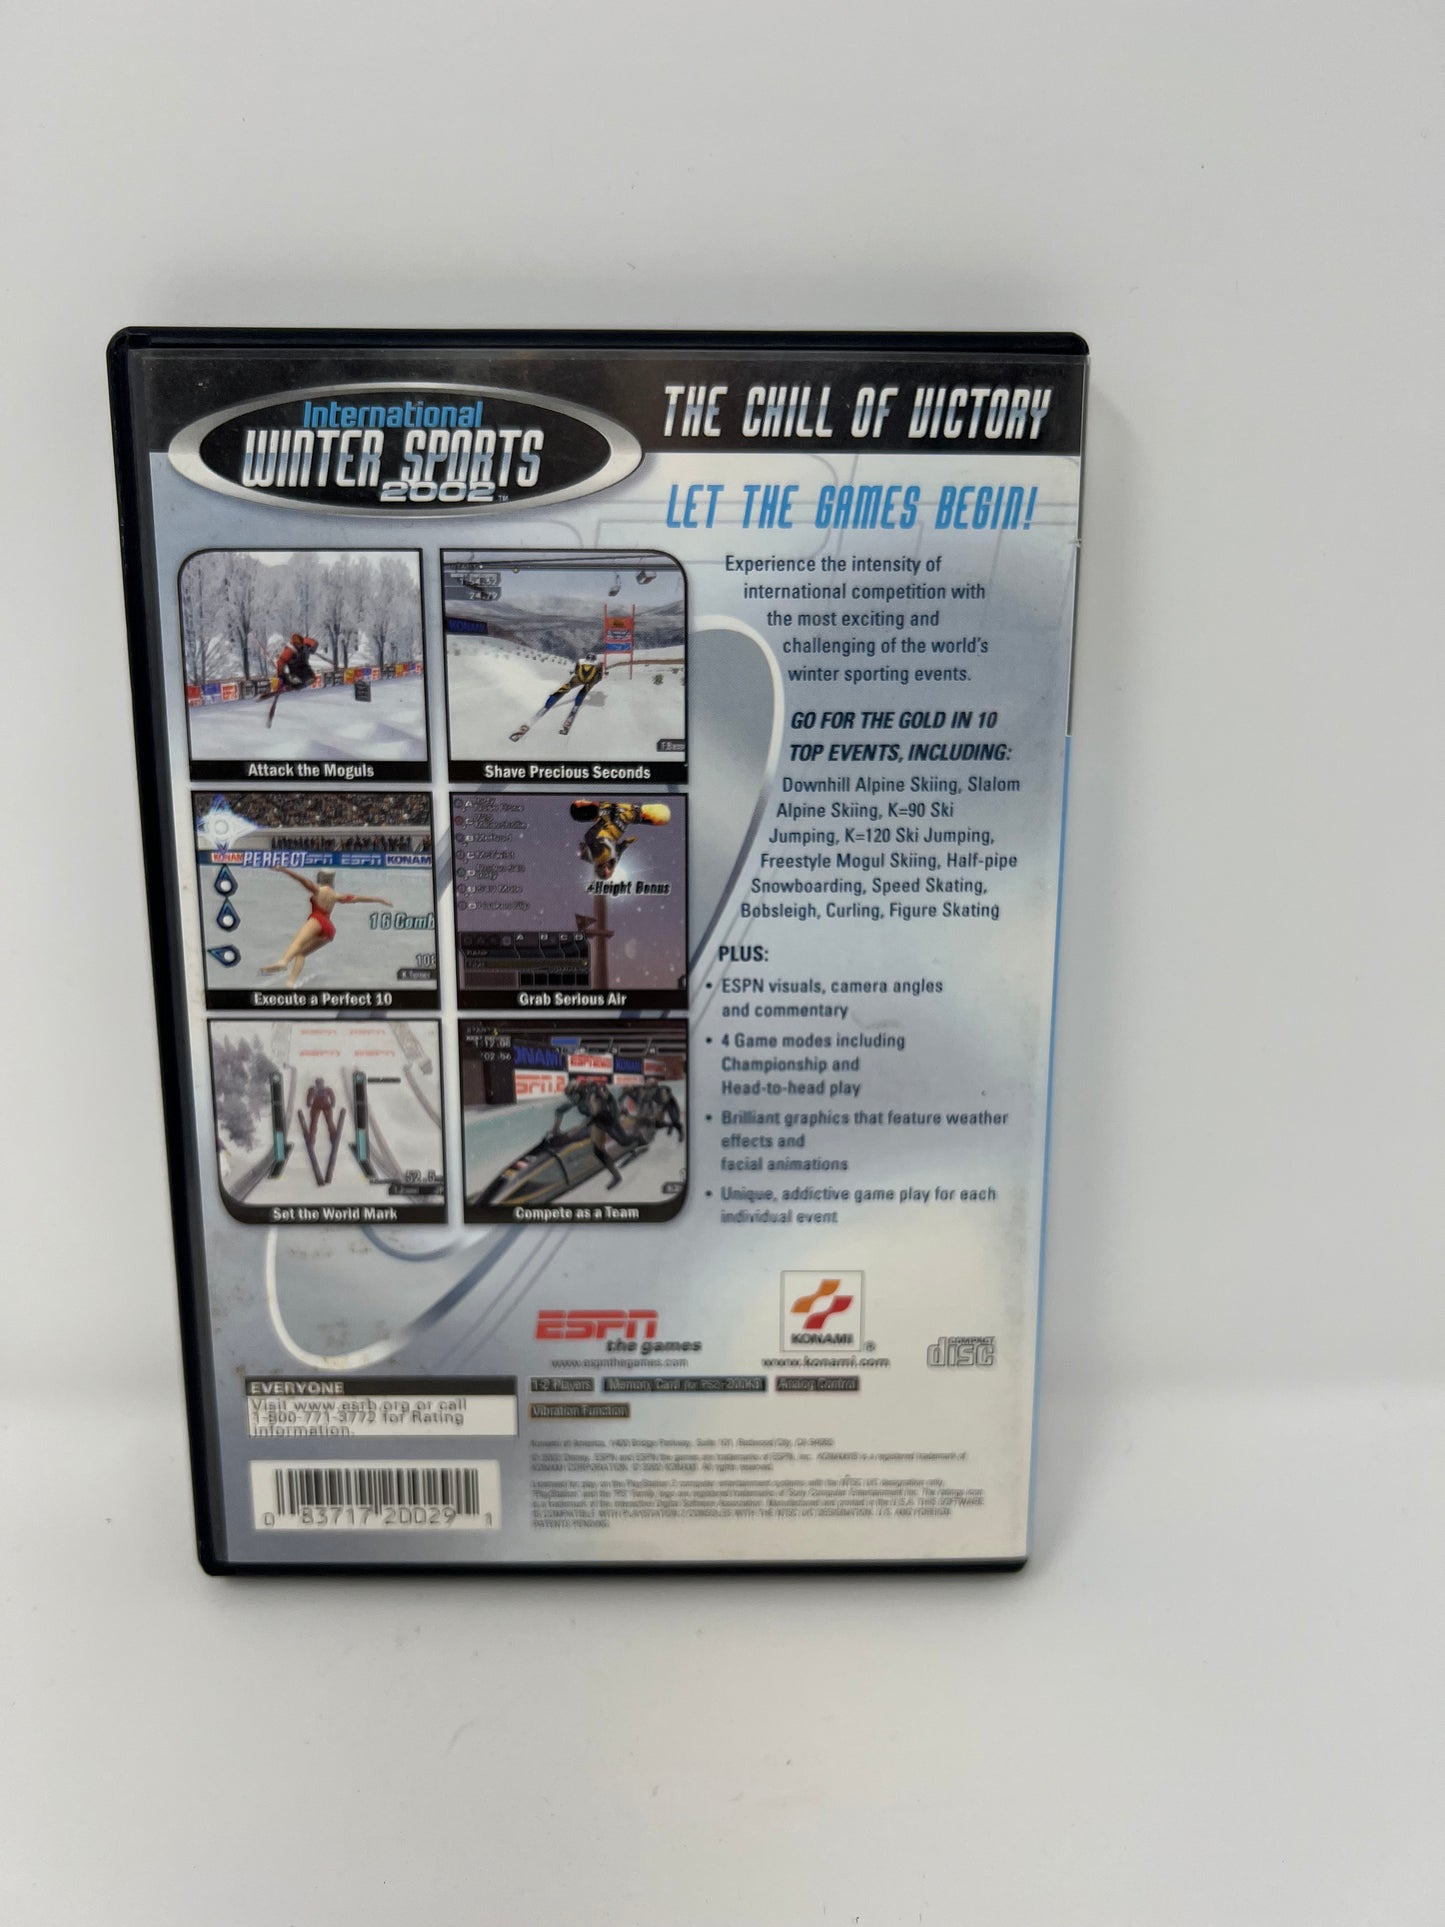 International Winter Sports 2002 - PS2 Game - Used